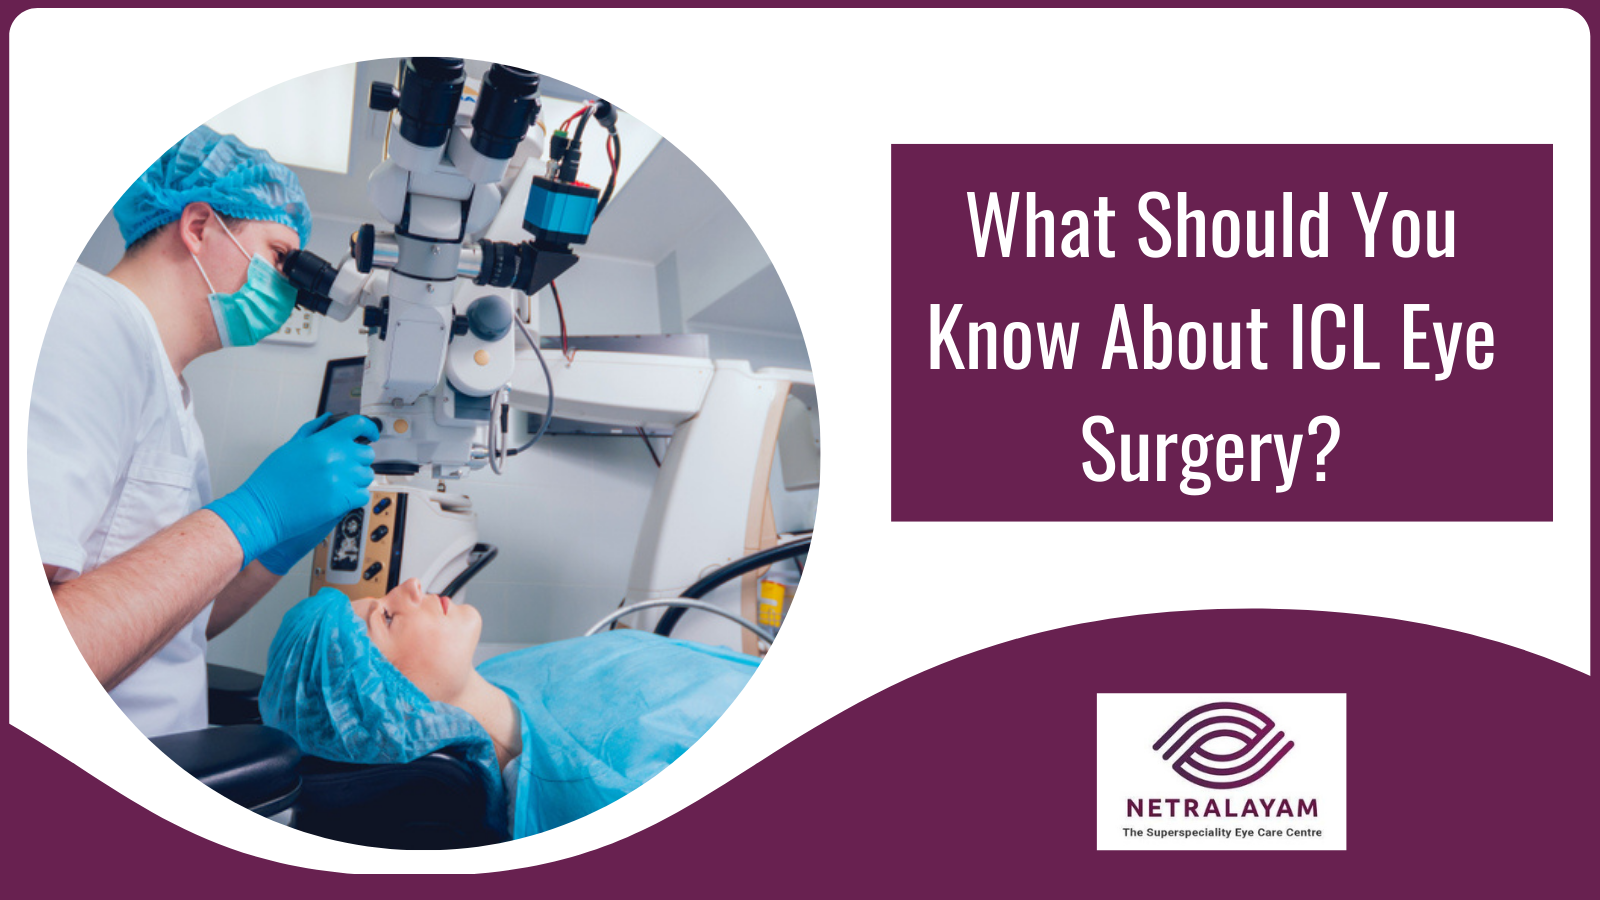 What Should You Know About ICL Eye Surgery?